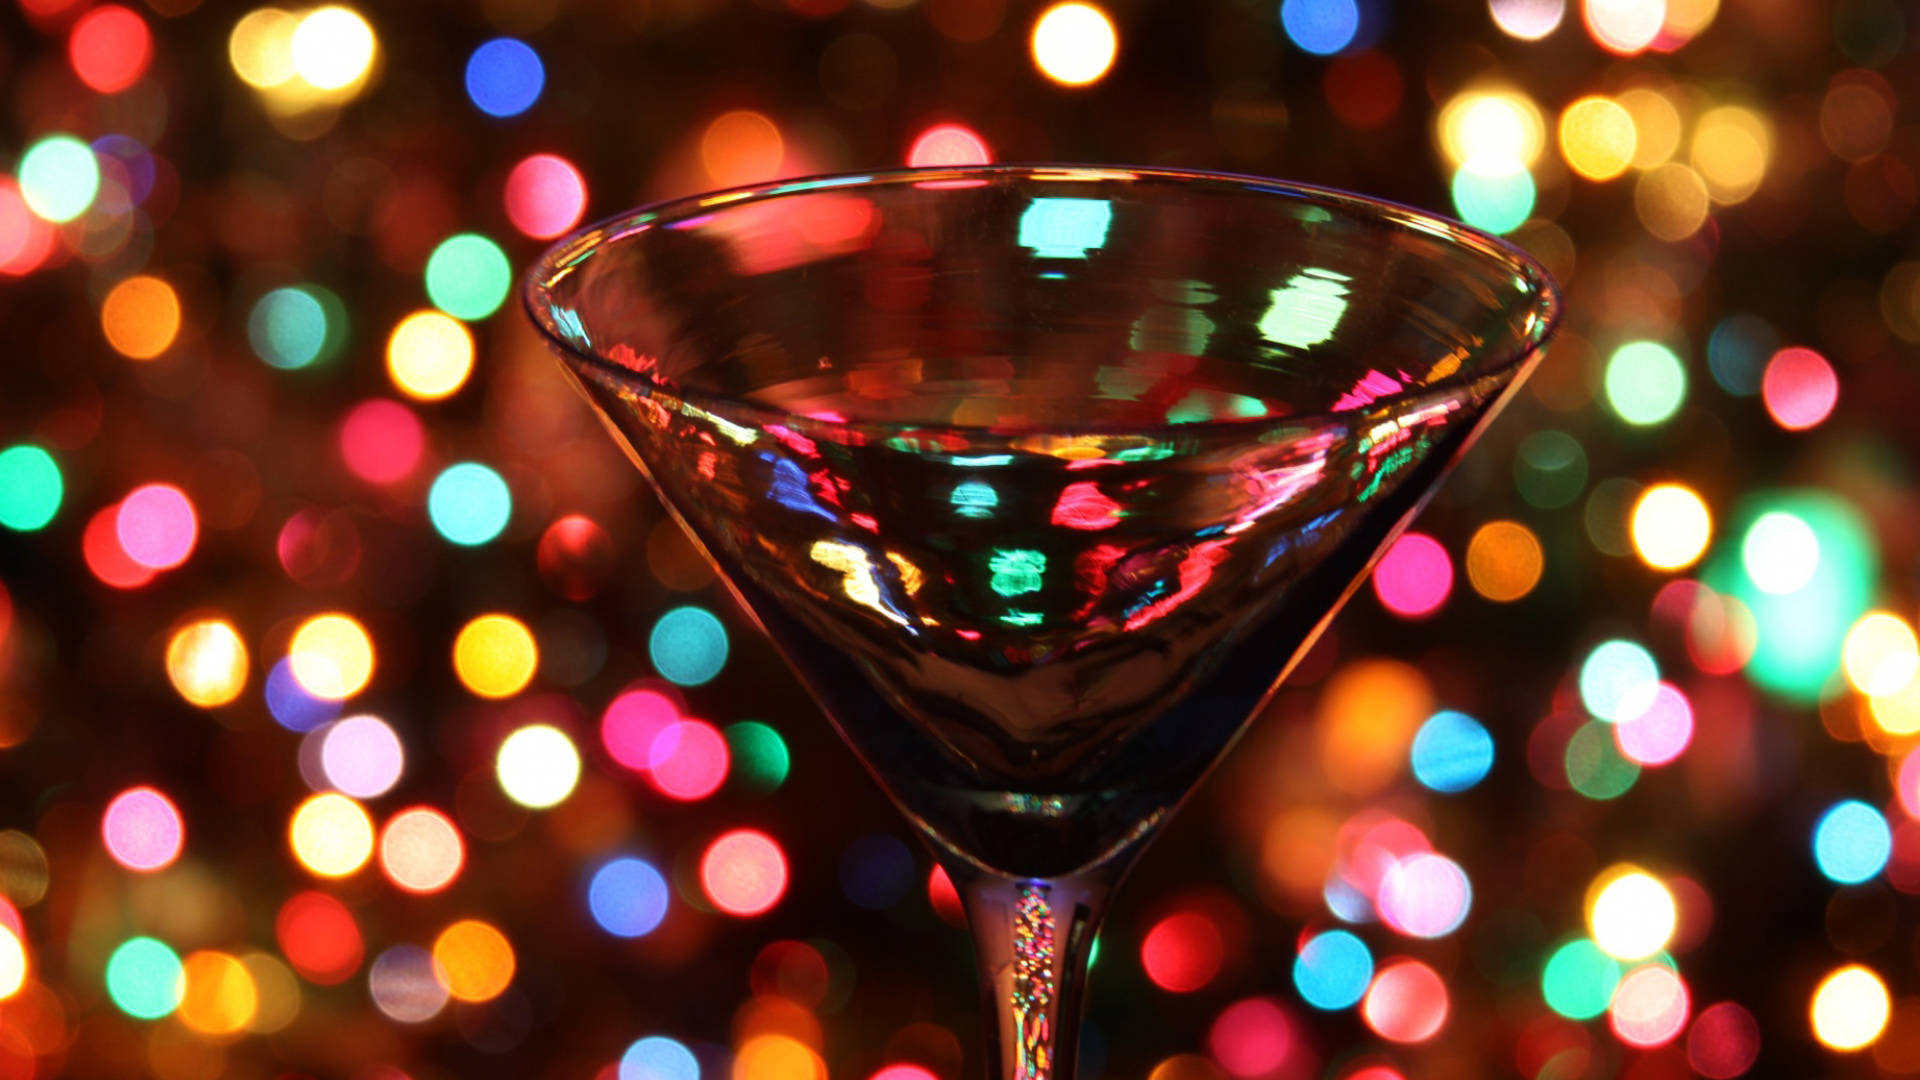 "A Radiant Martini Glass Glowing in the Darkness" Wallpaper